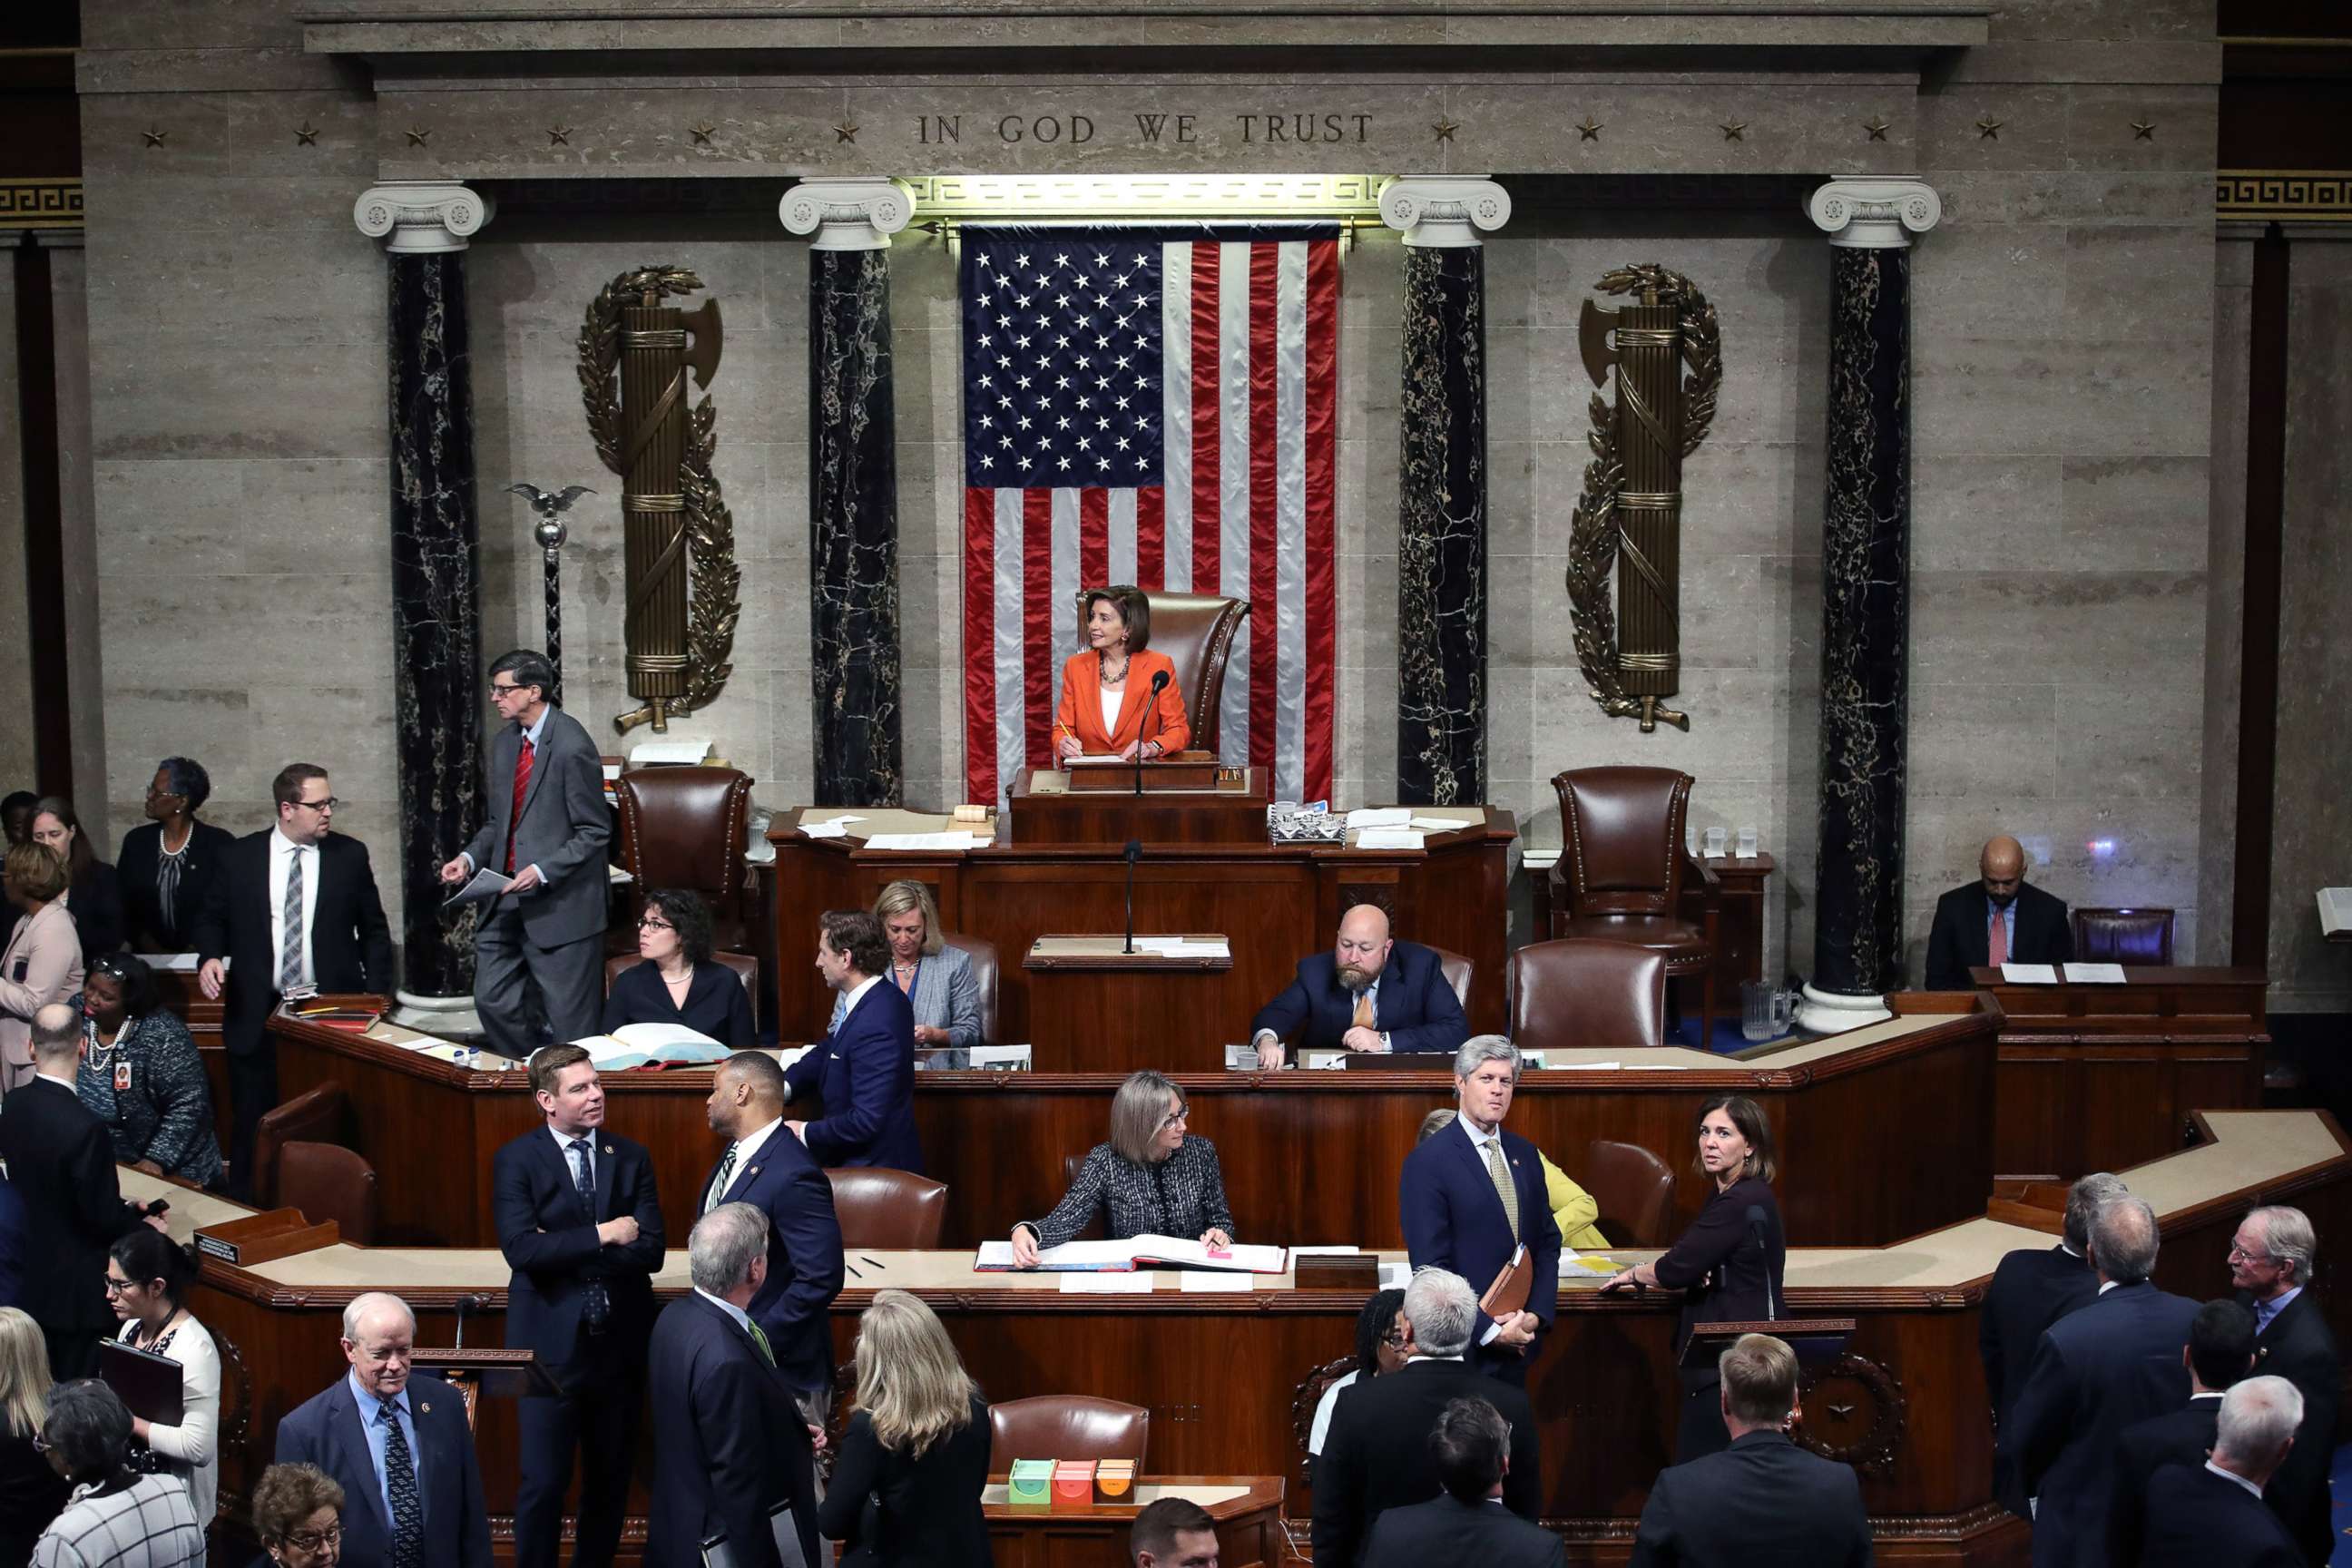 PHOTO: Speaker of the House Nancy Pelosi presides over the U.S. House of Representatives as it votes on a resolution formalizing the impeachment inquiry centered on President Donald Trump in the House Chamber, Oct.31, 2019 in Washington, D.C.